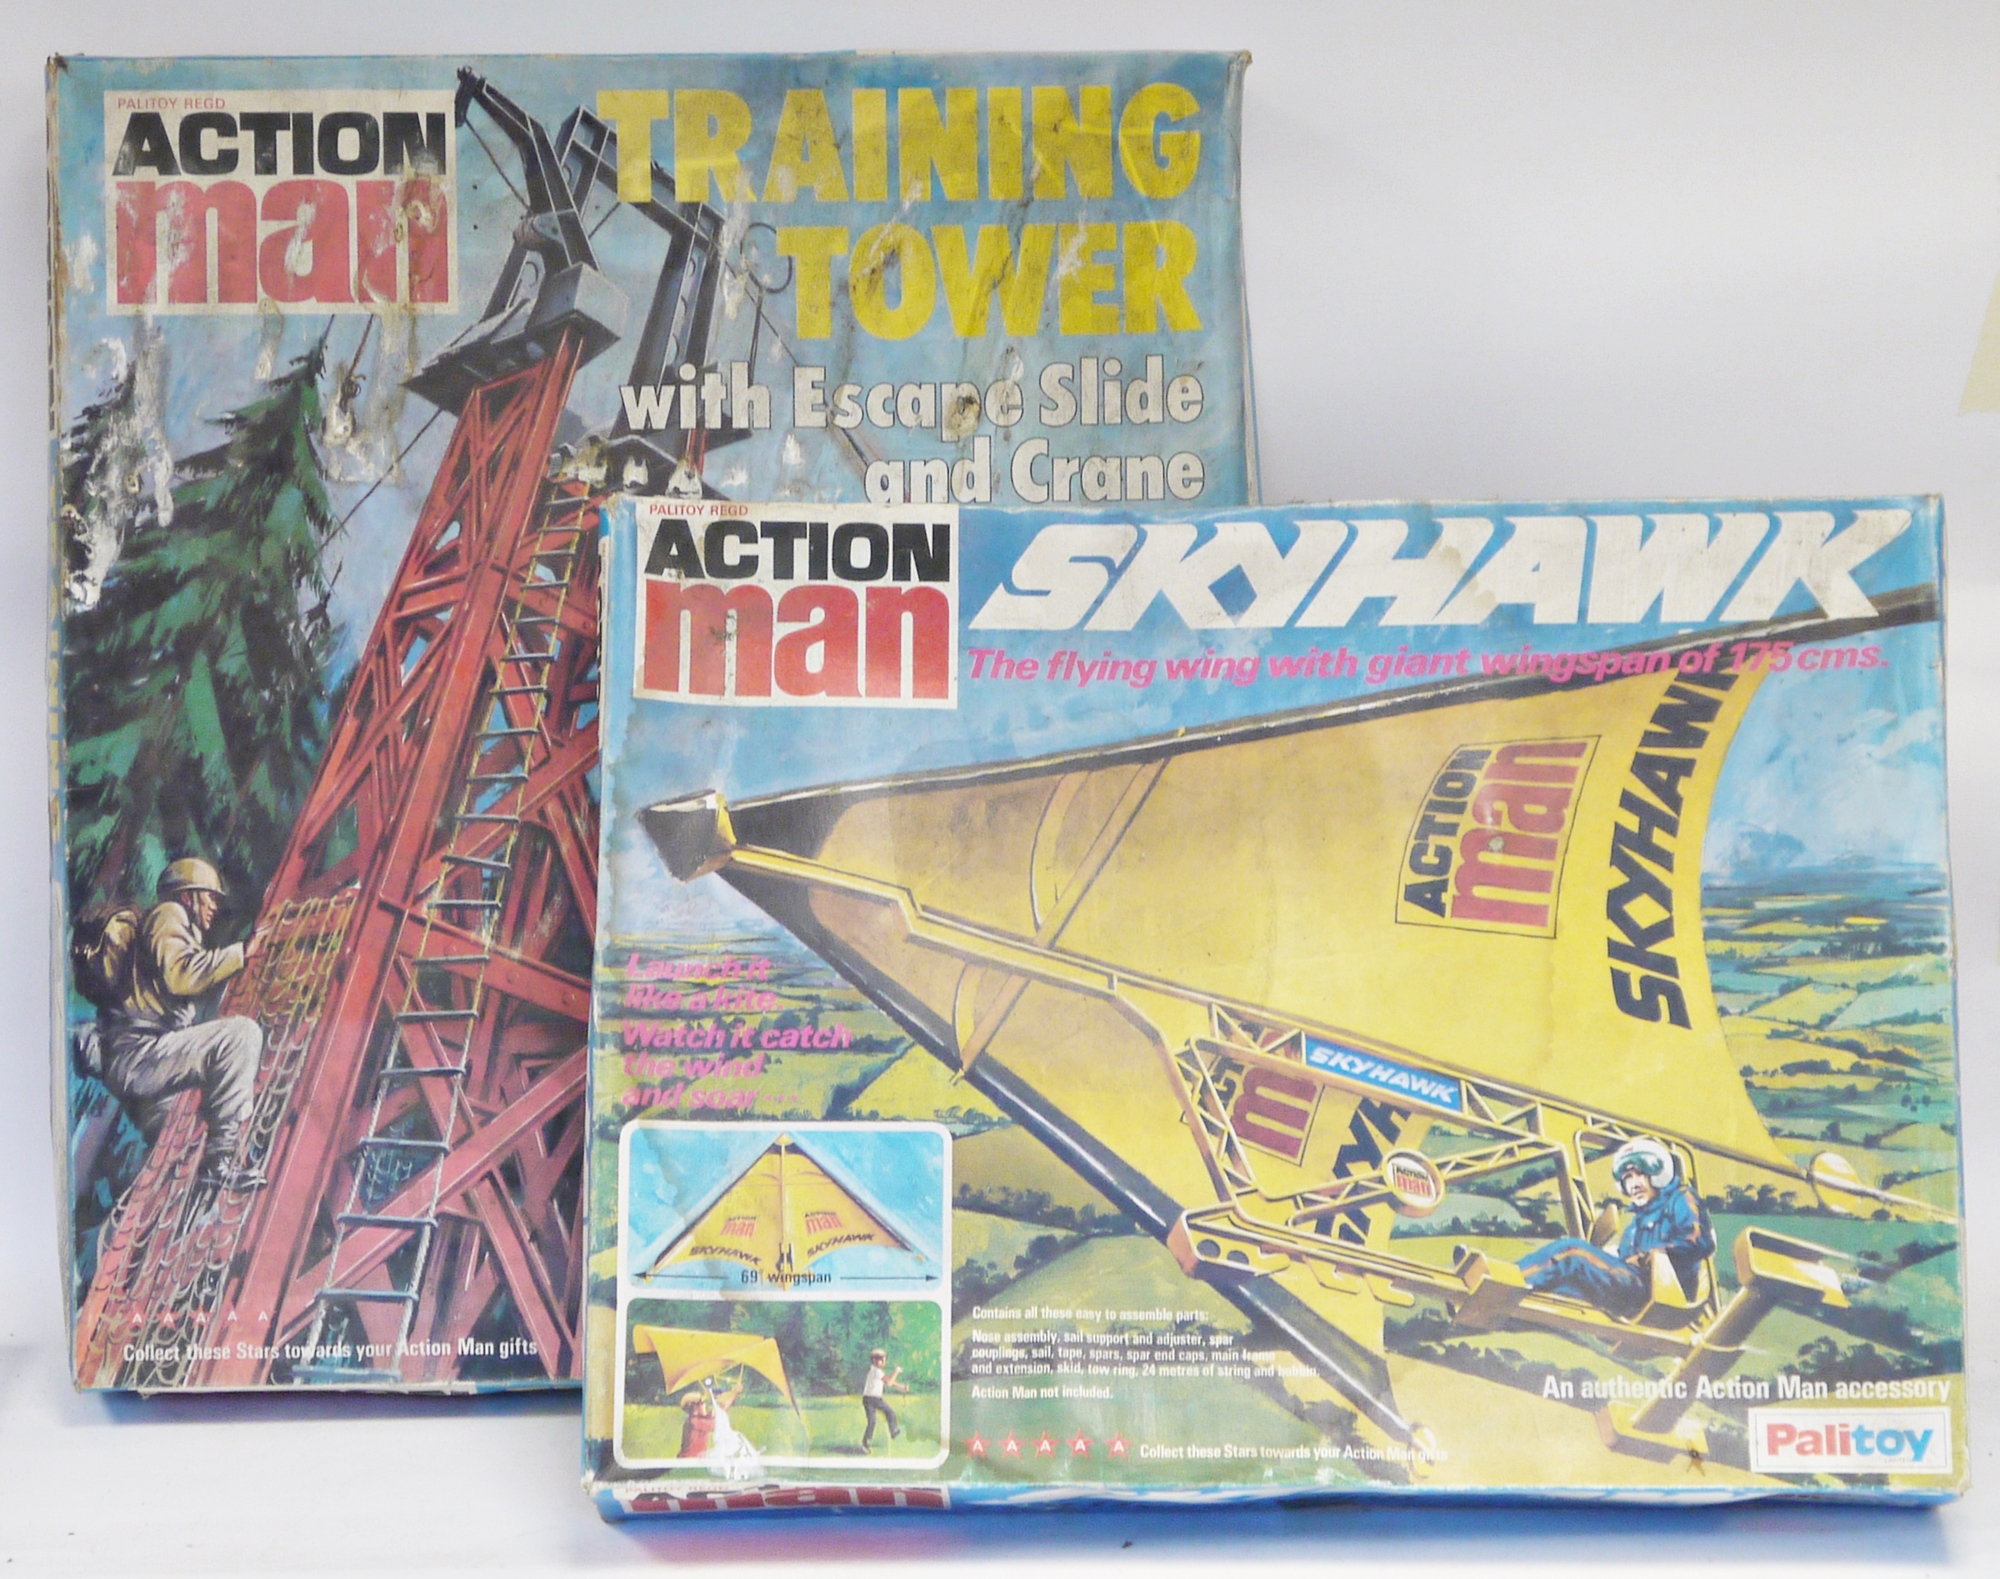 Palitoy Action Man Skyhawk 'the flying wing' in original box, together with a Palitoy Action Man